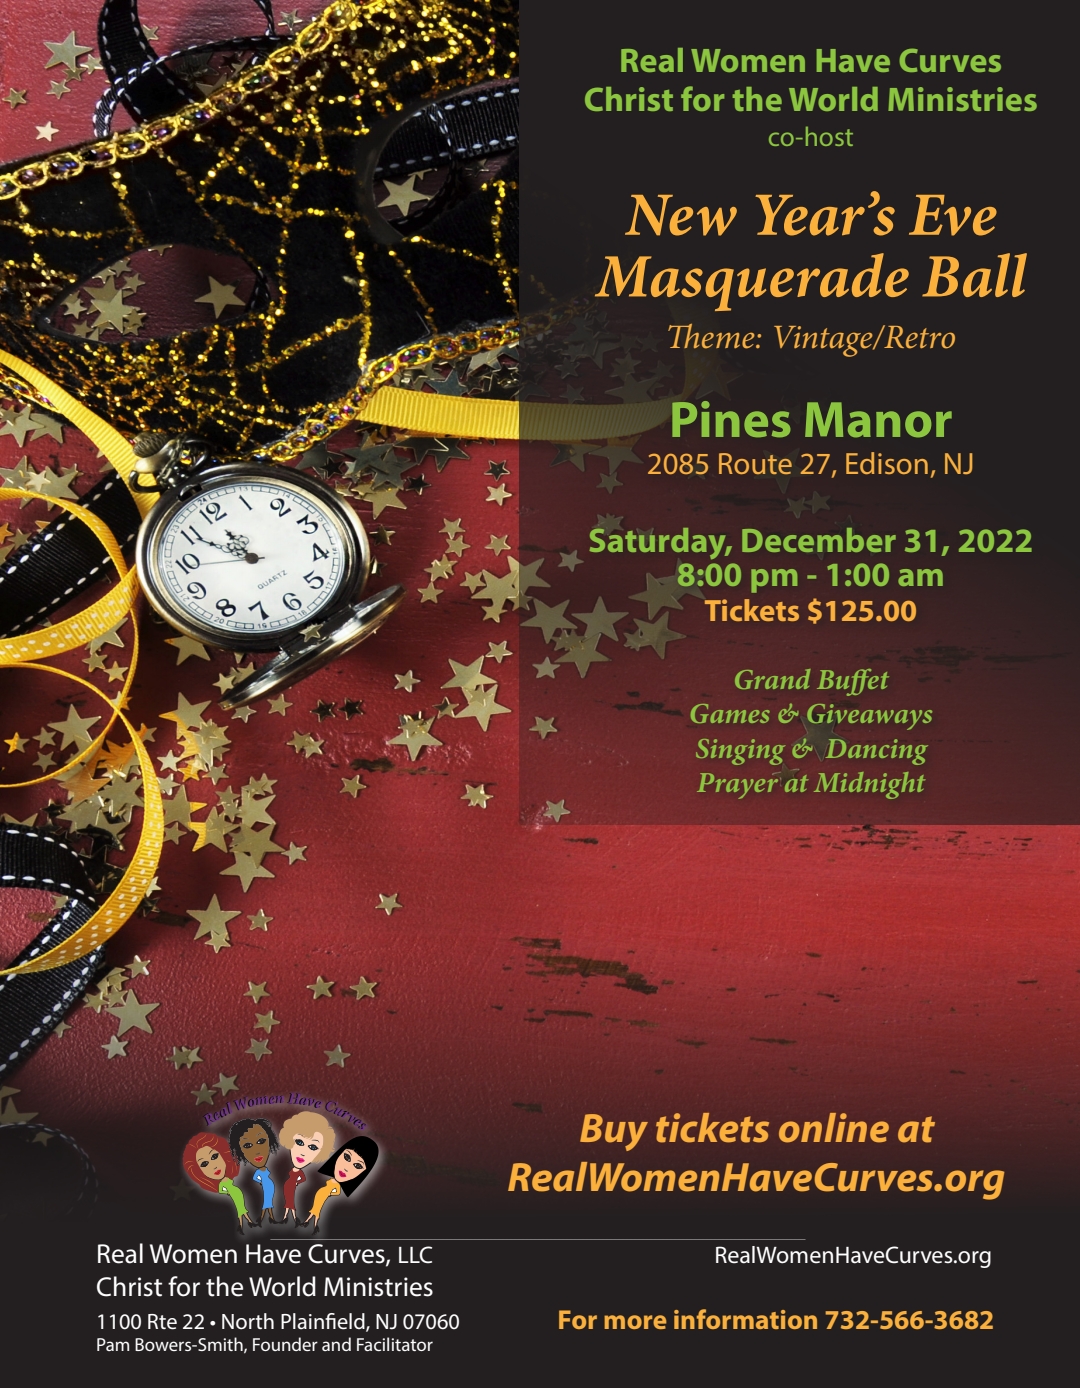 New Year's Eve Masquerade Ball. Click to register